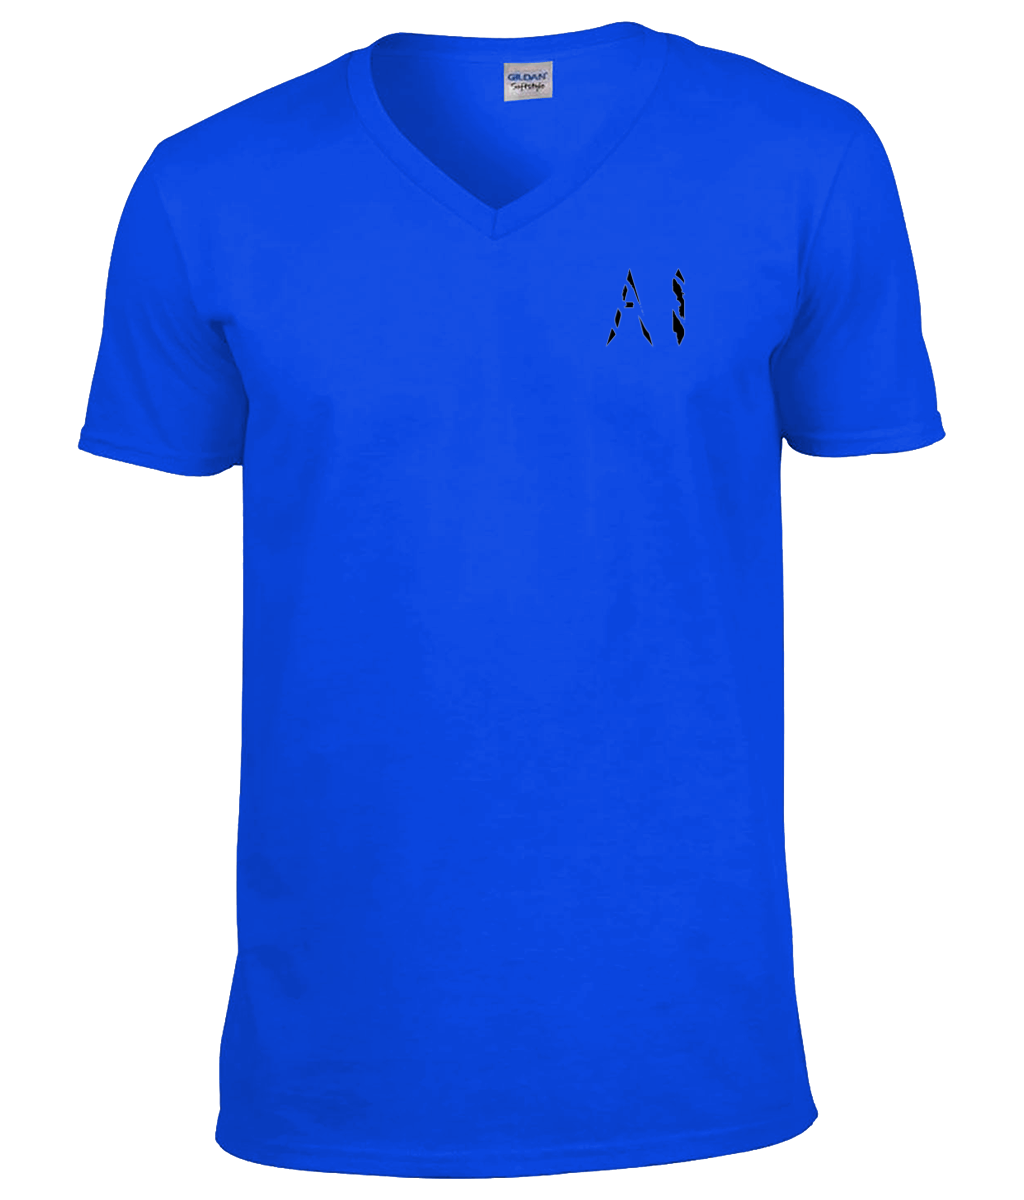 Womens blue Classic V Neck T-Shirt with black AI logo on left breast